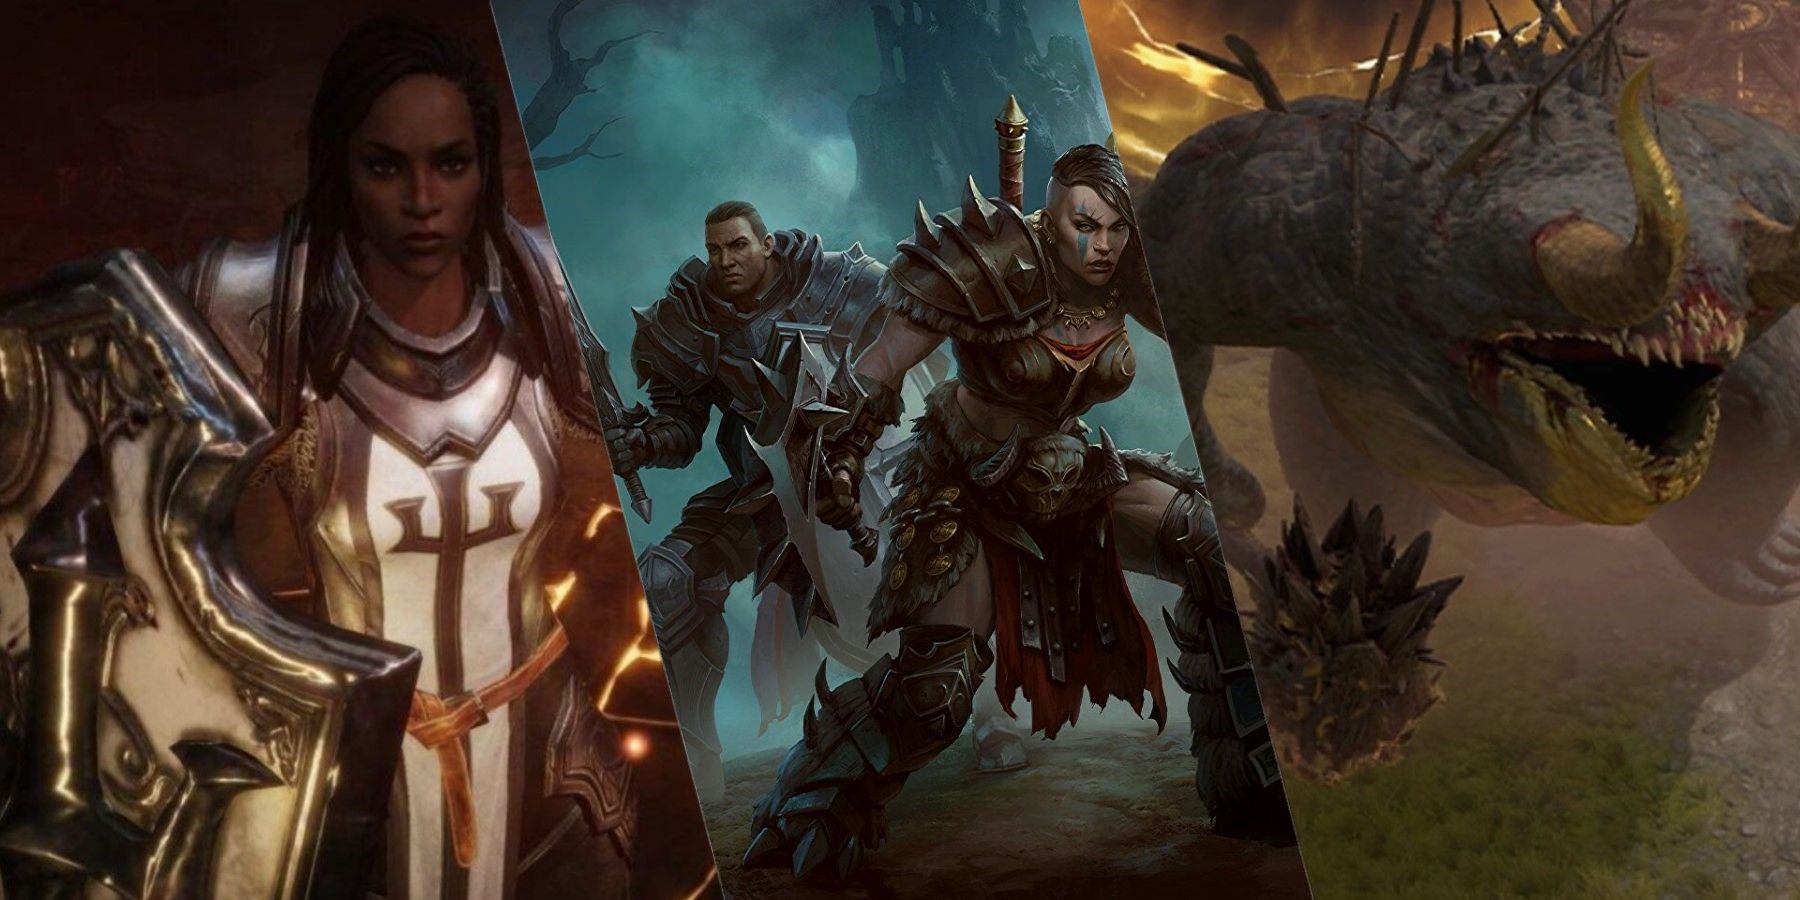 diablo immortal $24 million blizzard revenue two weeks release bad good sign community opposes monetization system numbers lower over time